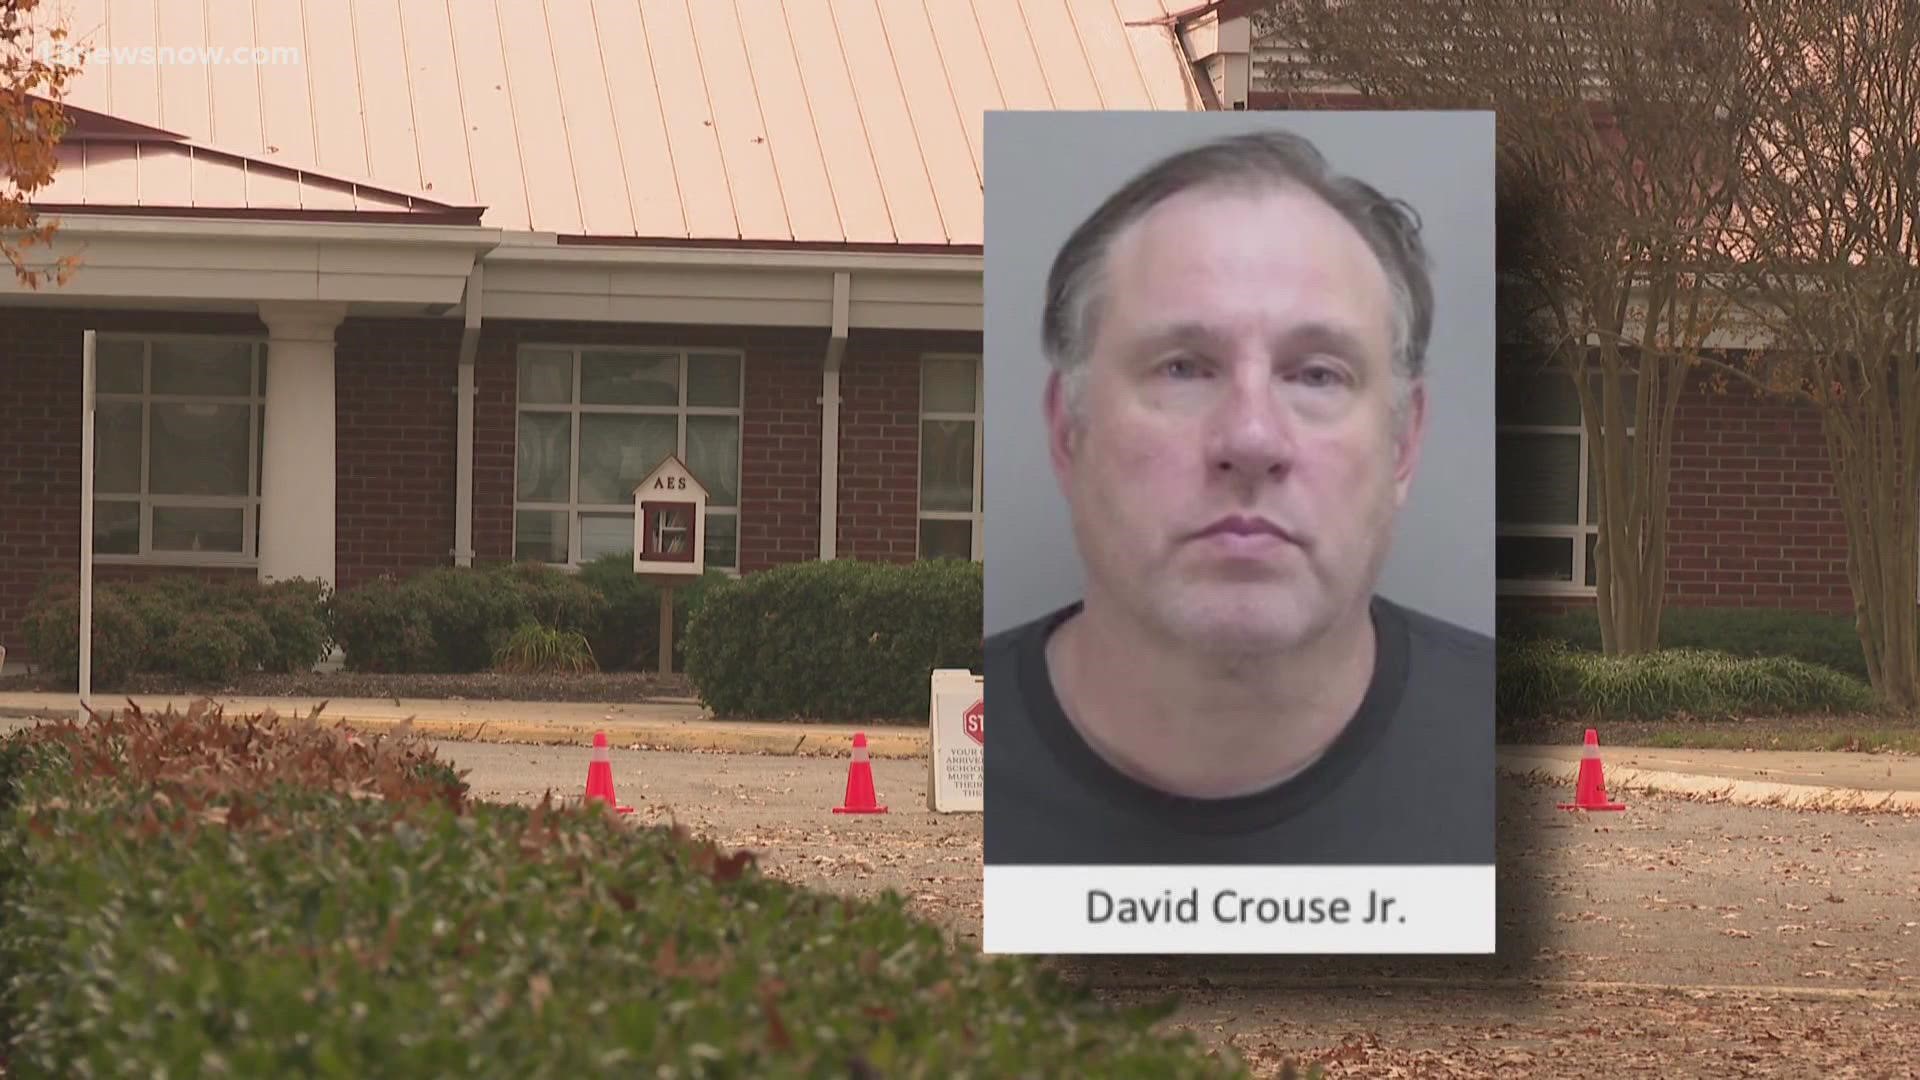 A Virginia Beach school employee is off the job tonight. David Crouse Jr. faces child pornography charges.